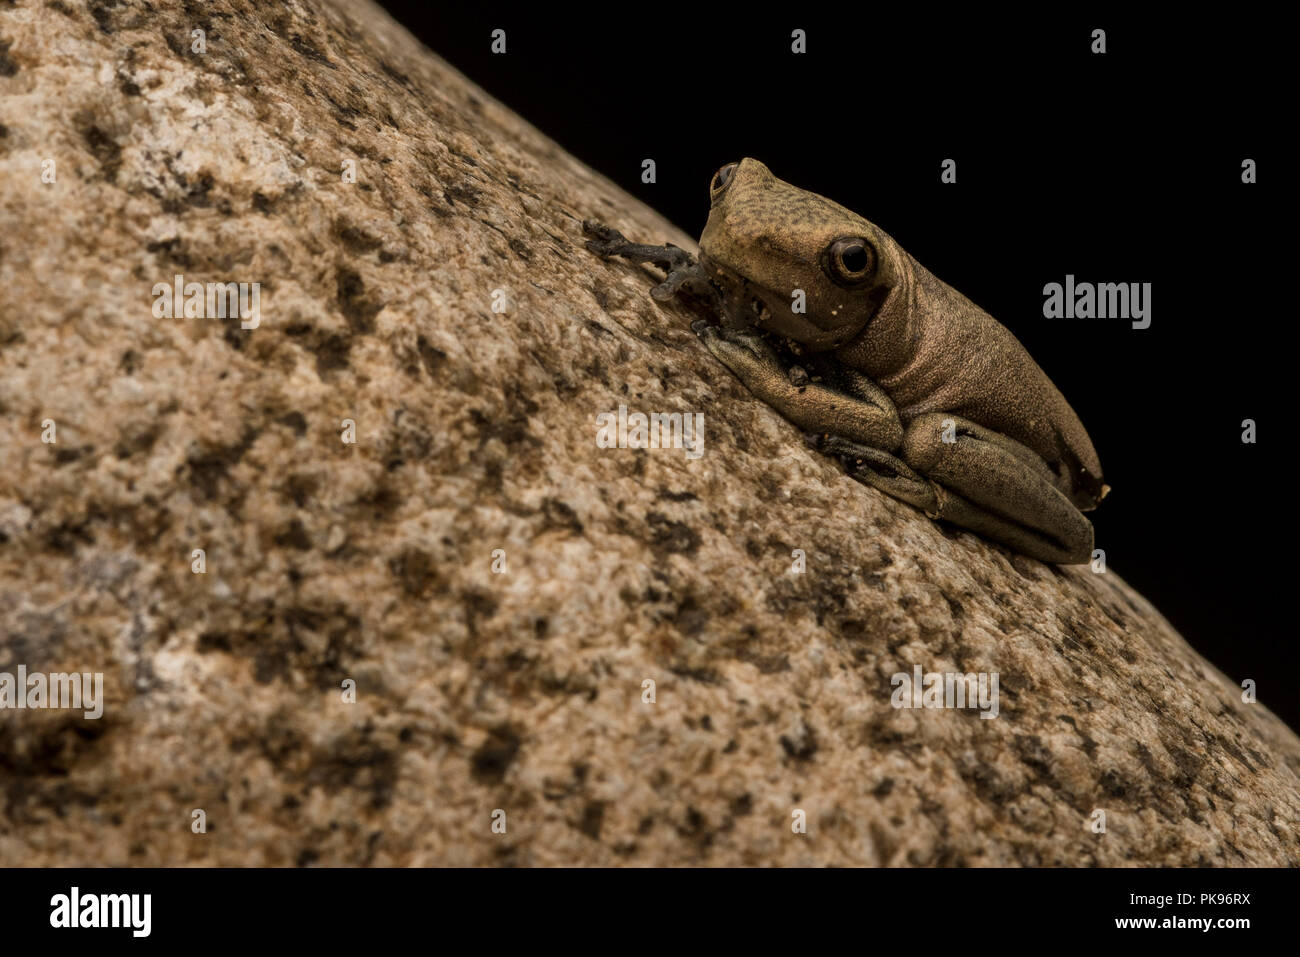 A newly metamorphosed map tree frog (Boana geographica) clings to a river rock, before the night ends it will disperse into the forest. Stock Photo